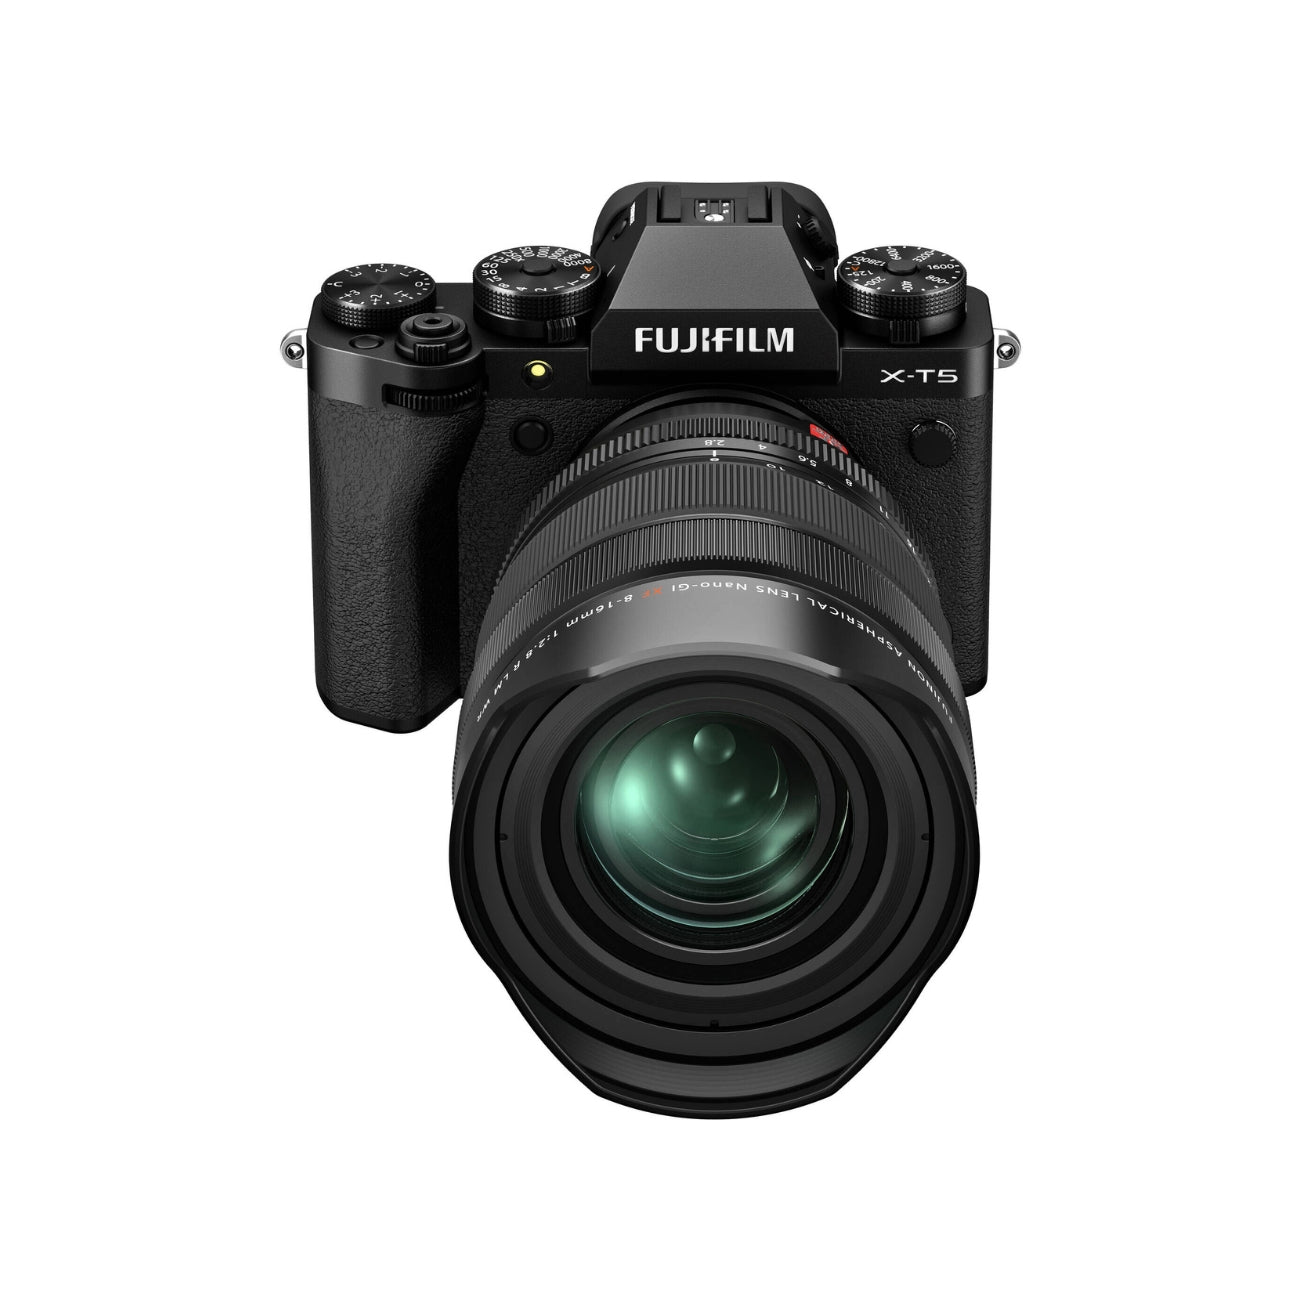 Front view of the Fujifilm X-T5 with lens